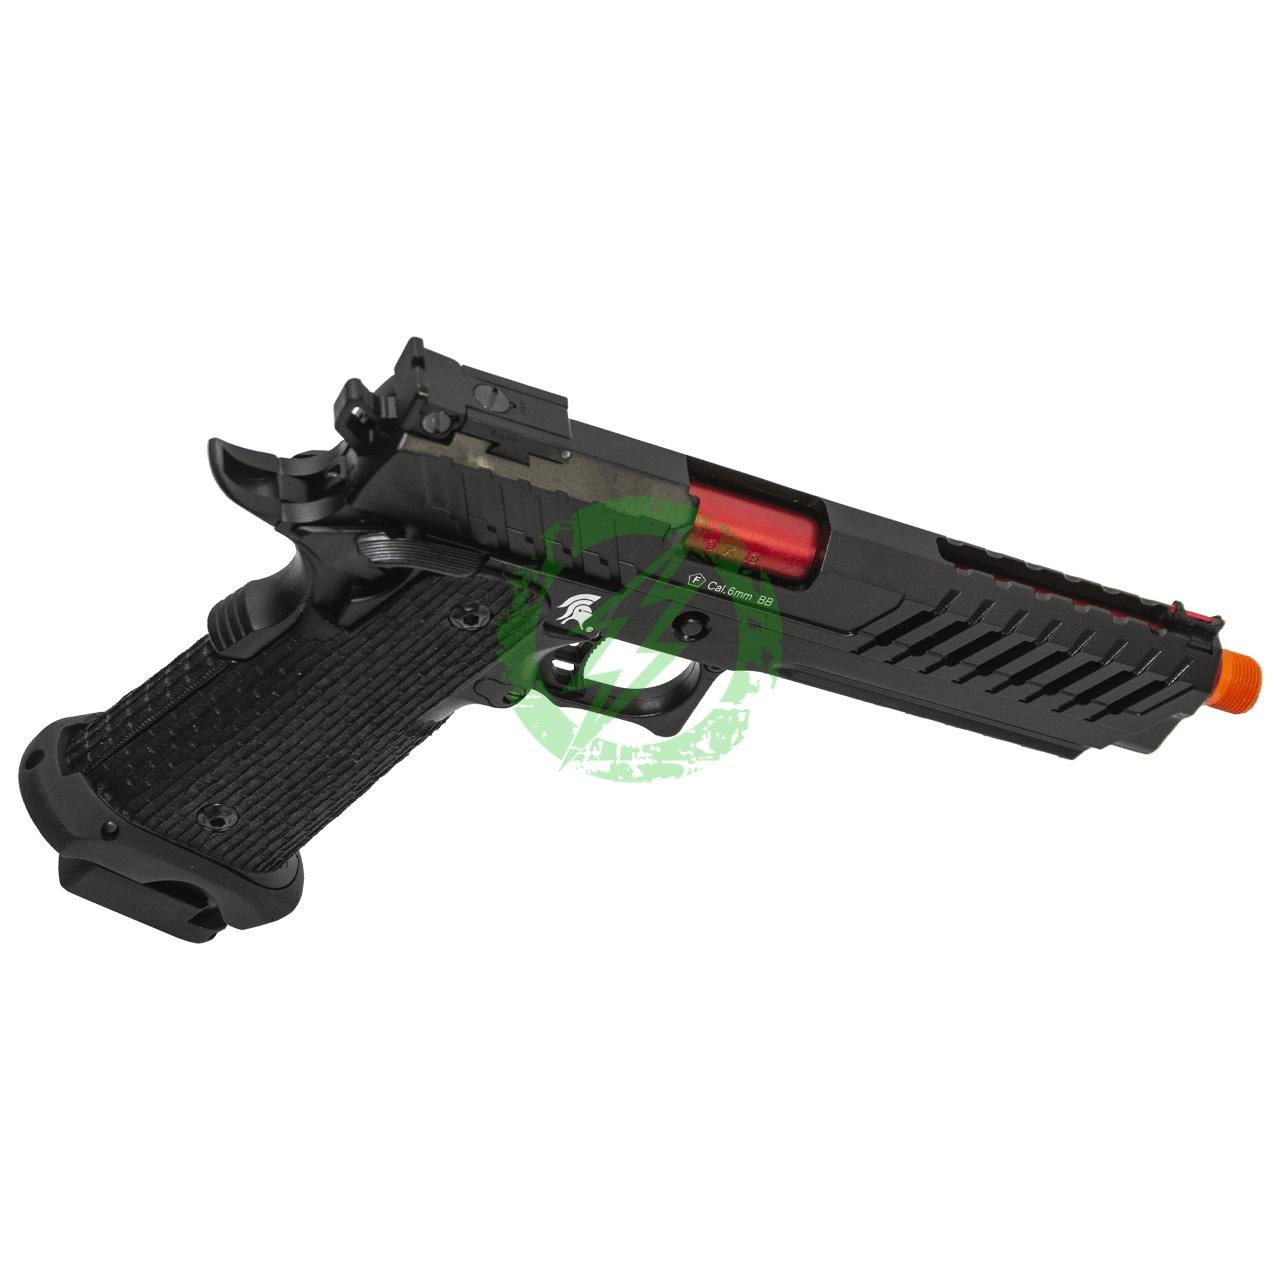  Lancer Tactical KnightShade HiCapa GBB Airsoft Pistol 